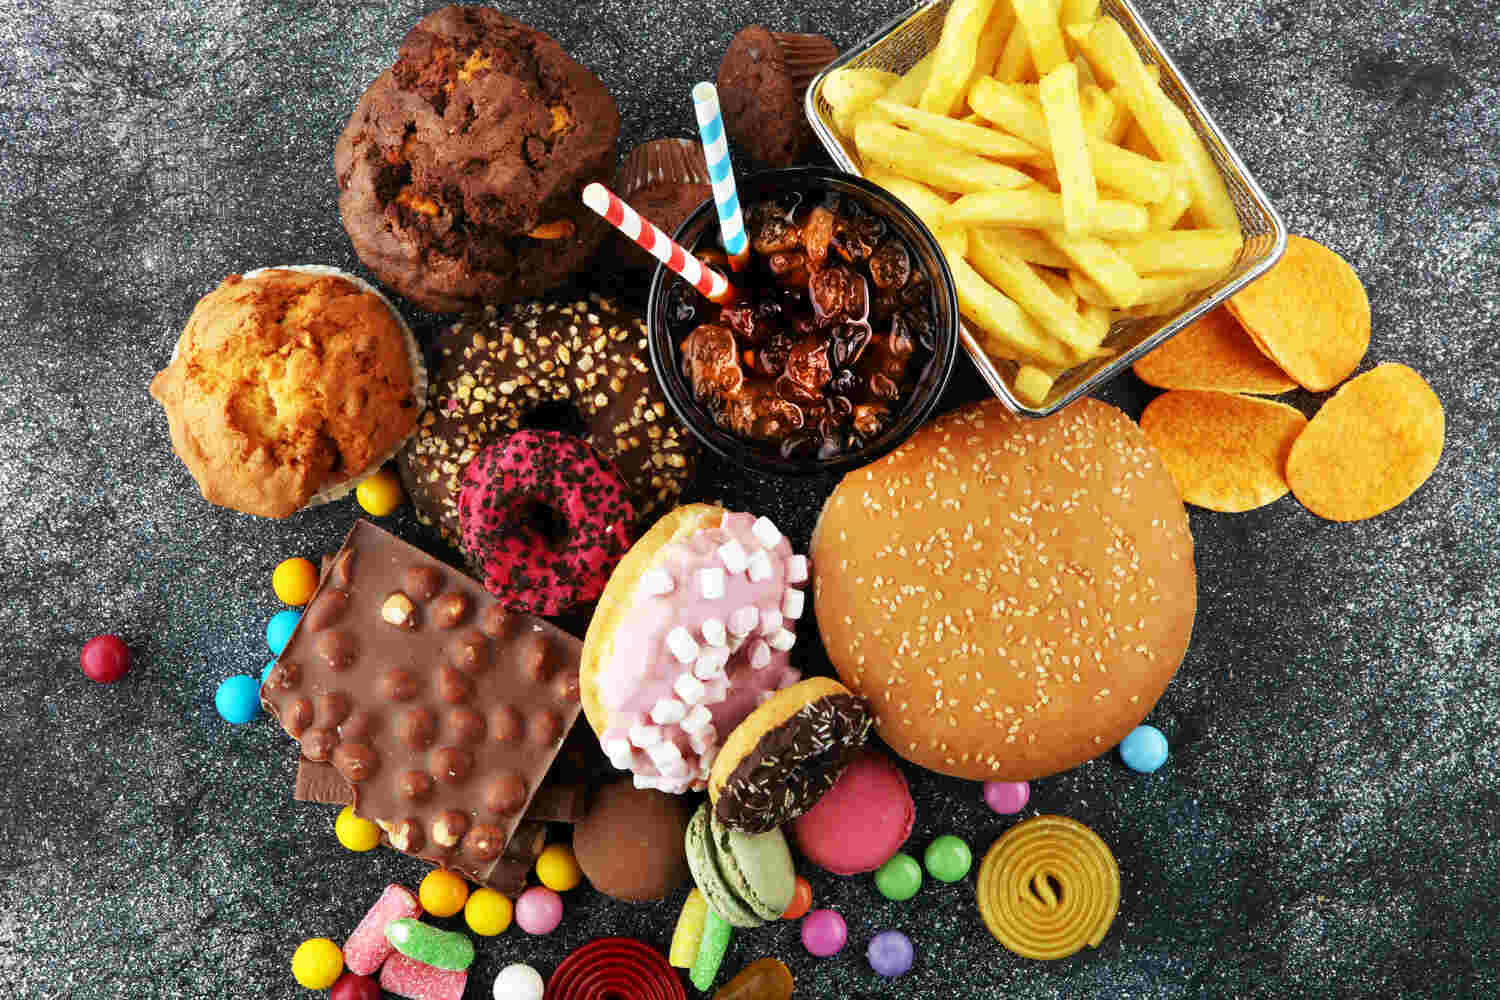 10 Ways Junk Food Can Be Unsafe During Pregnancy